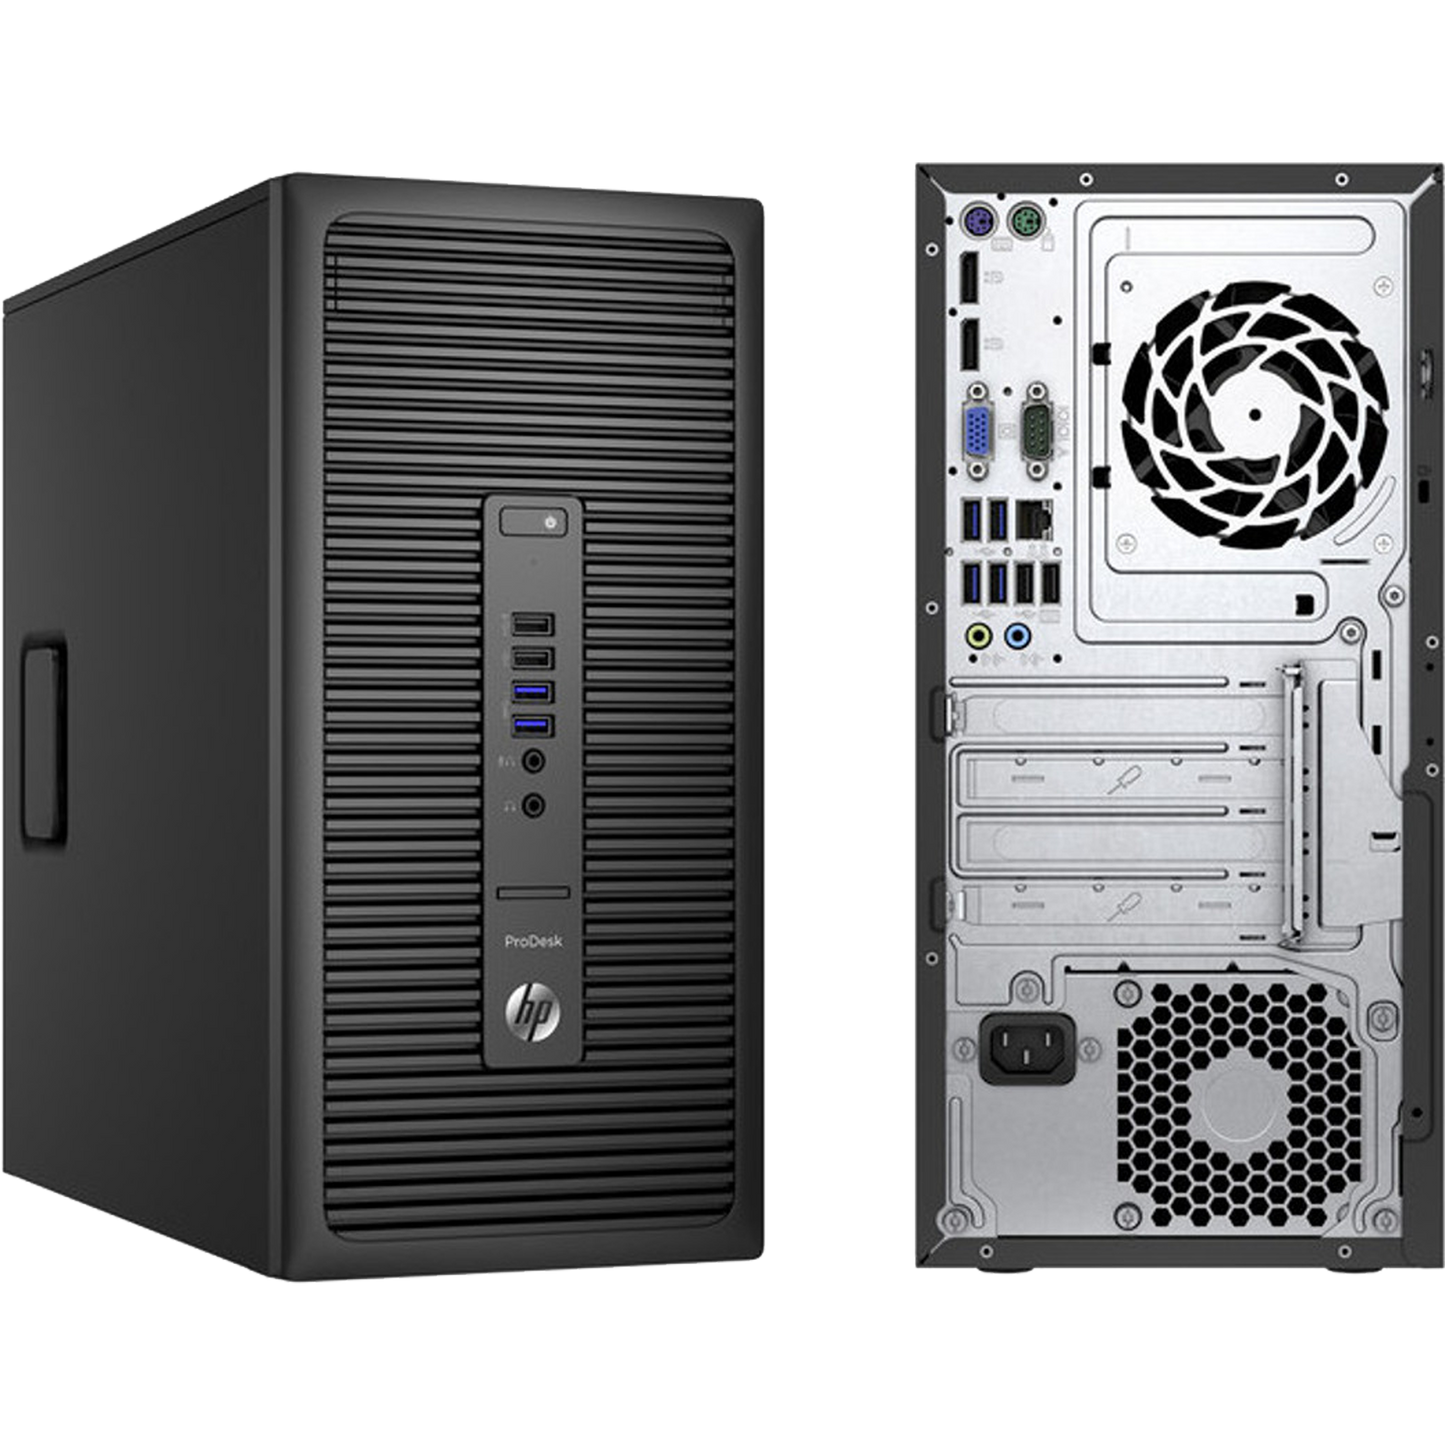 HP ProDesk 600 G1 Intel Core i5, 4th Gen Tower PC with 8GB Ram Desktop Computers